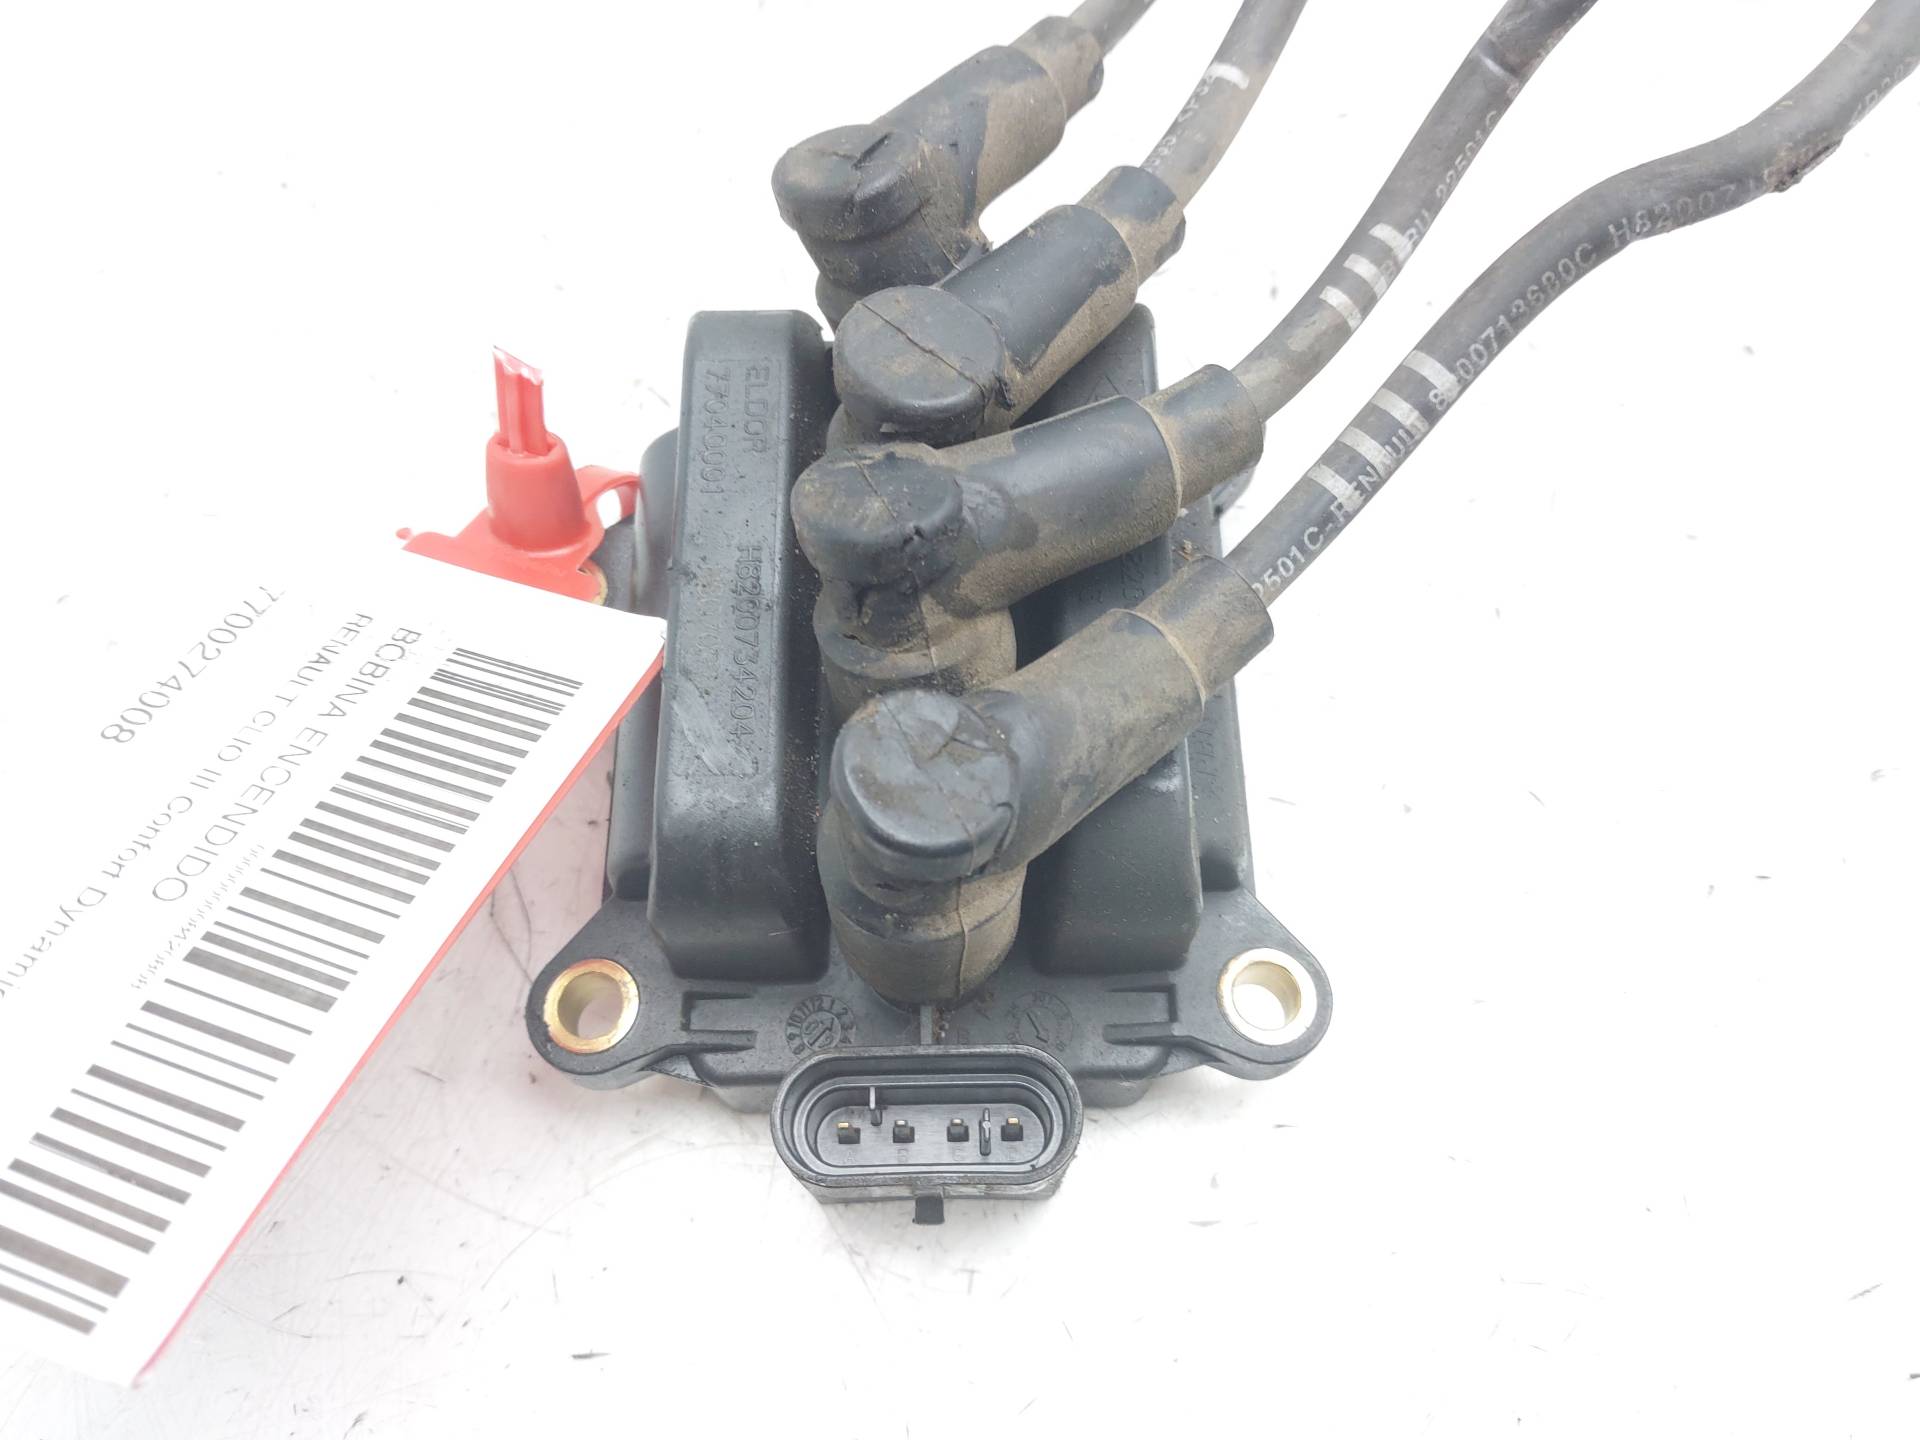 RENAULT Clio 3 generation (2005-2012) High Voltage Ignition Coil 7700274008 22629858